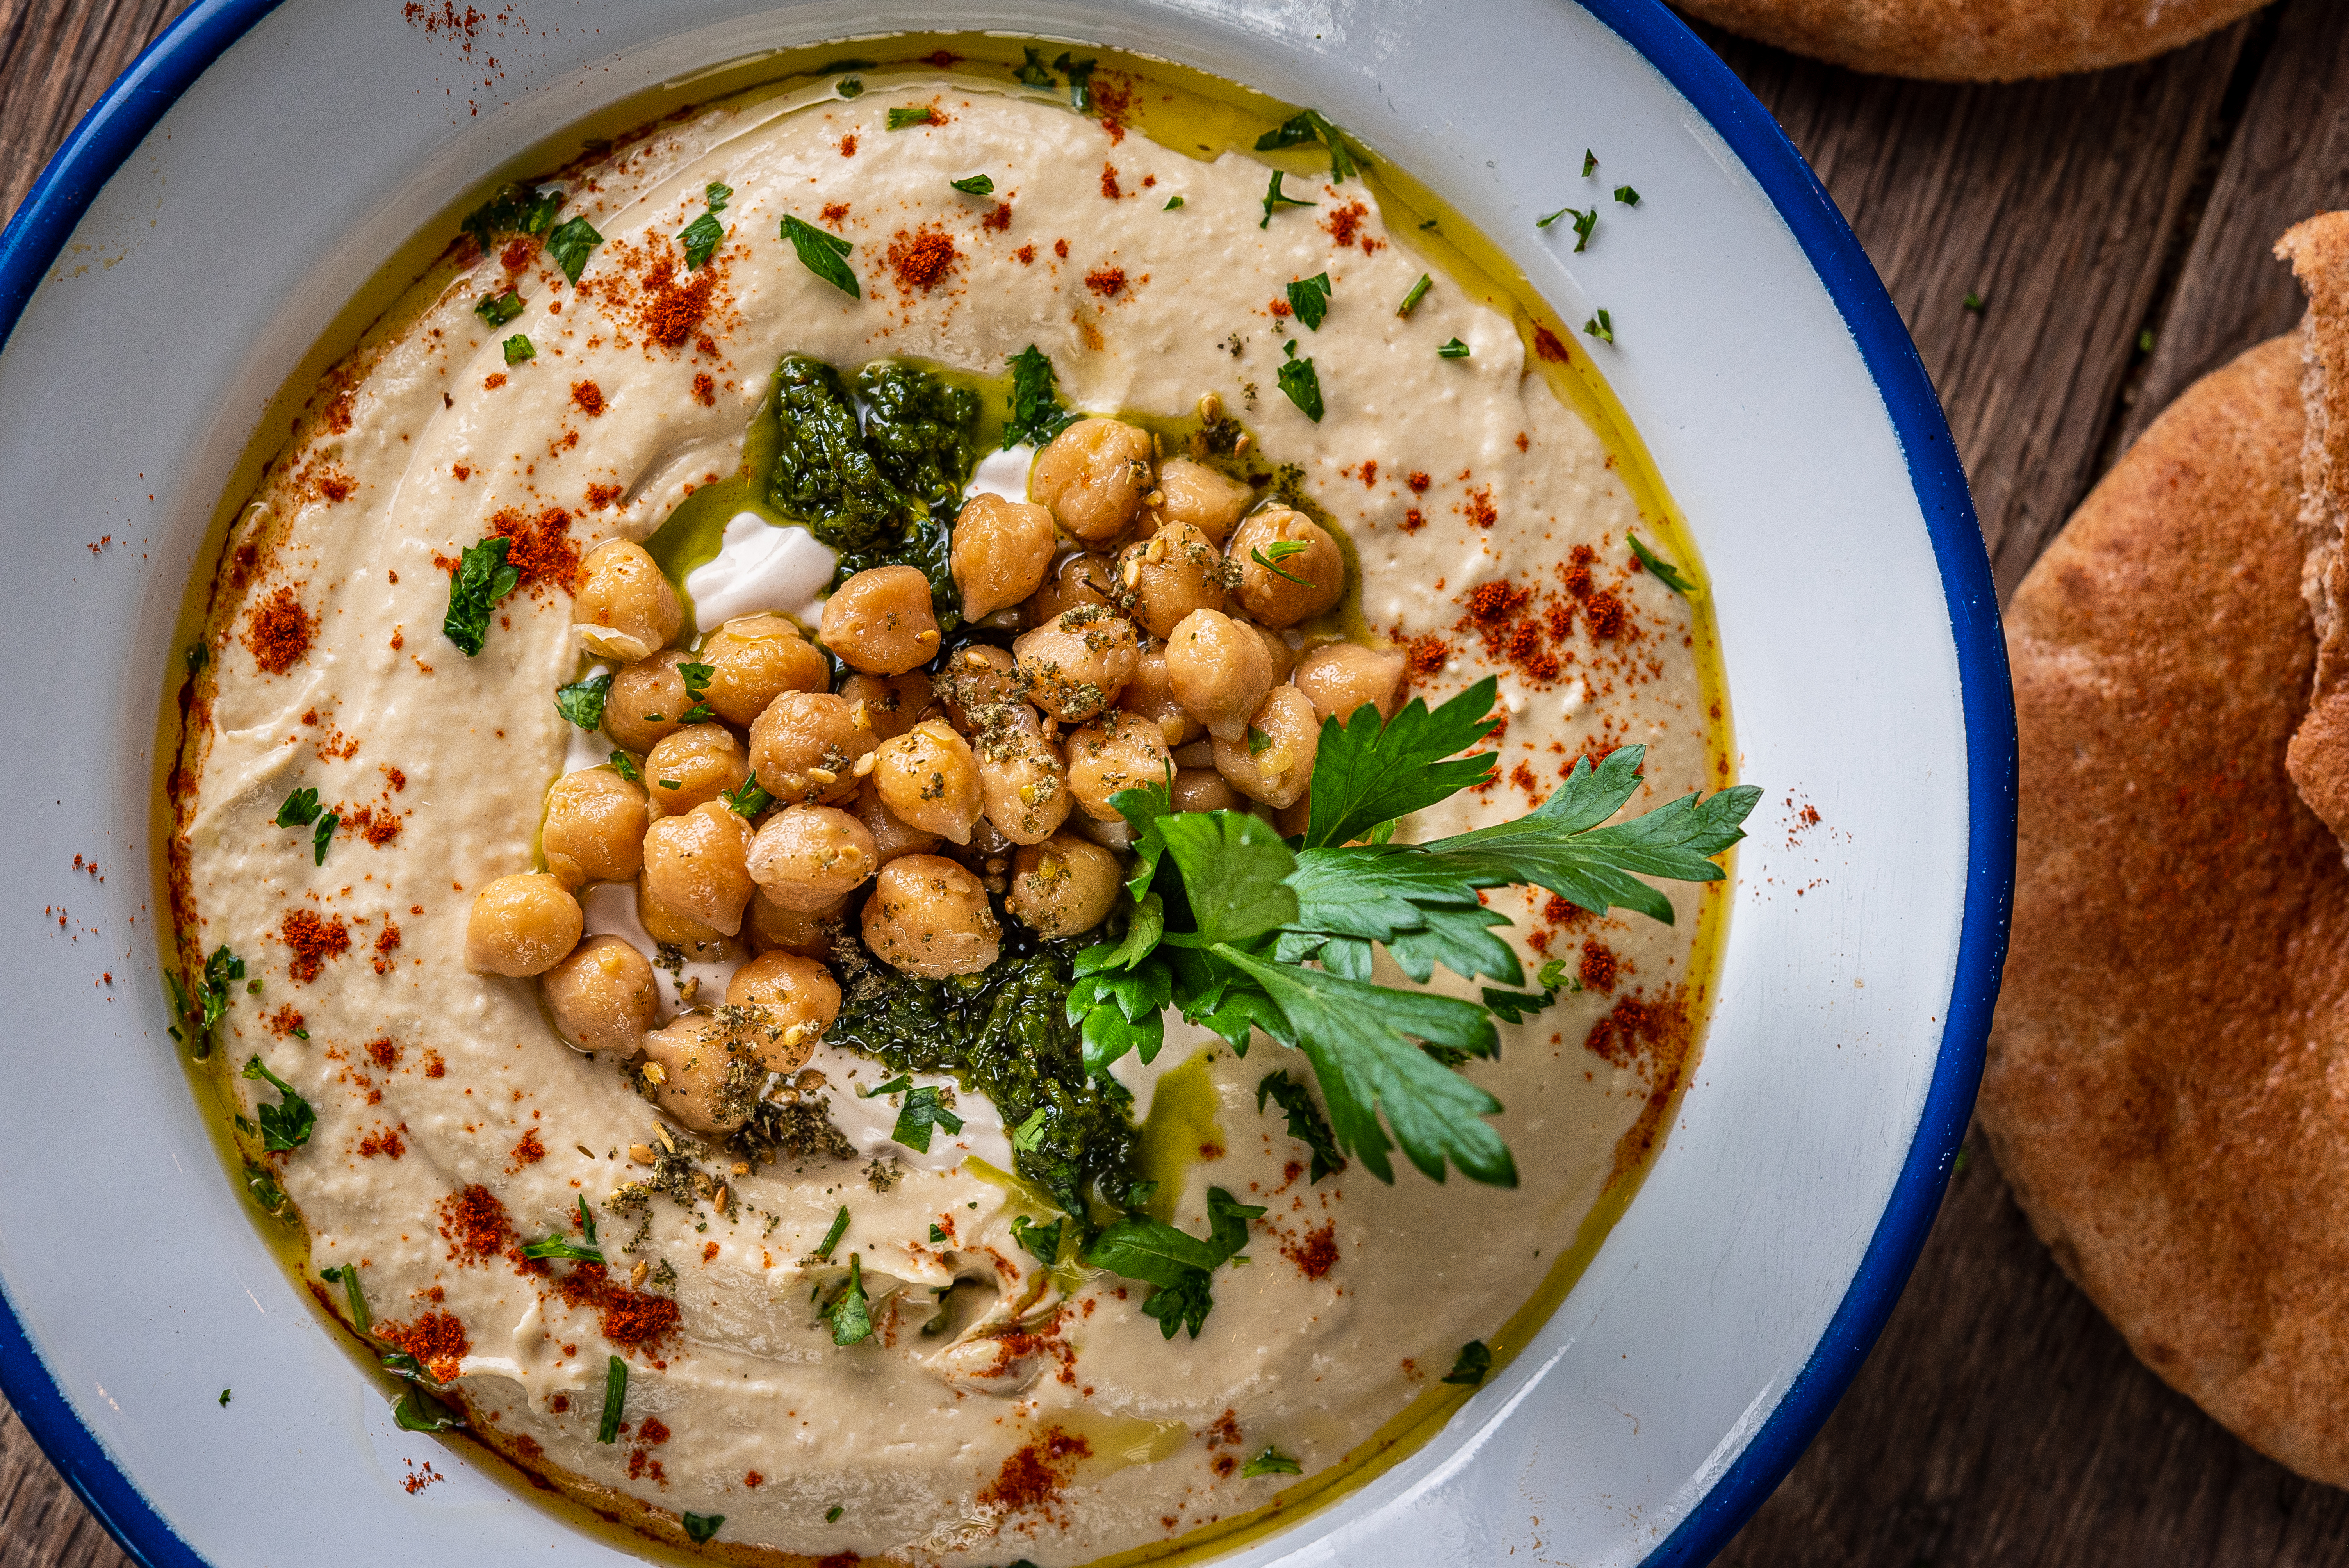 A close-up of a “classic” hummus bowl from Shouk with tahina, chickpeas, za’atar, spices, parsley, and olive oil.